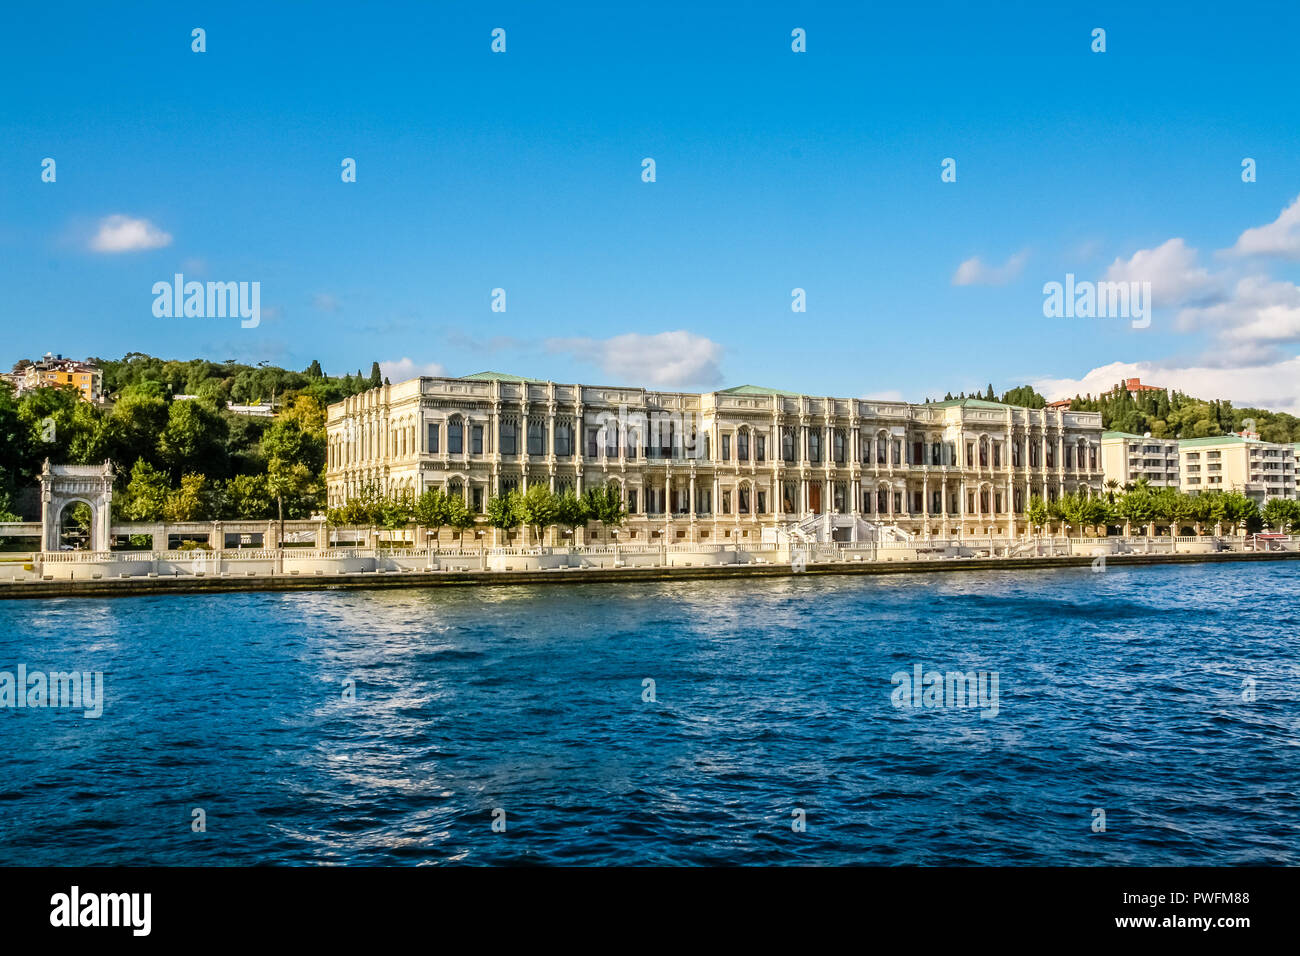 Çırağan Palace Kempinsk is an Ottoman Imperial Palace and Hotel on the Bosphorus, Istanbul. Stock Photo